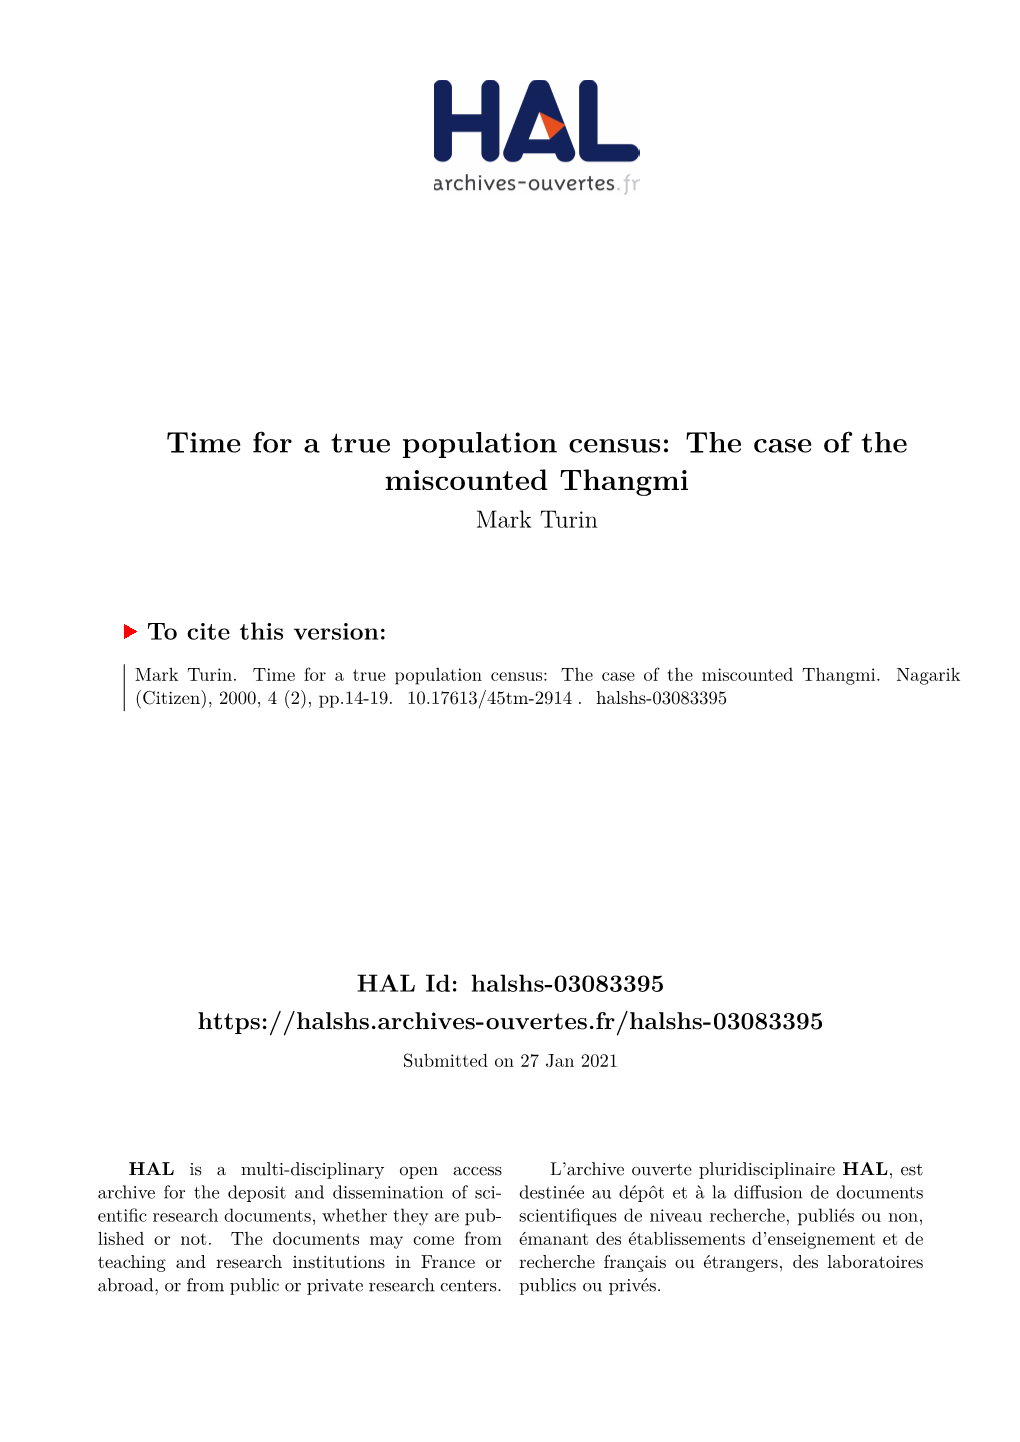 Time for a True Population Census: the Case of the Miscounted Thangmi Mark Turin